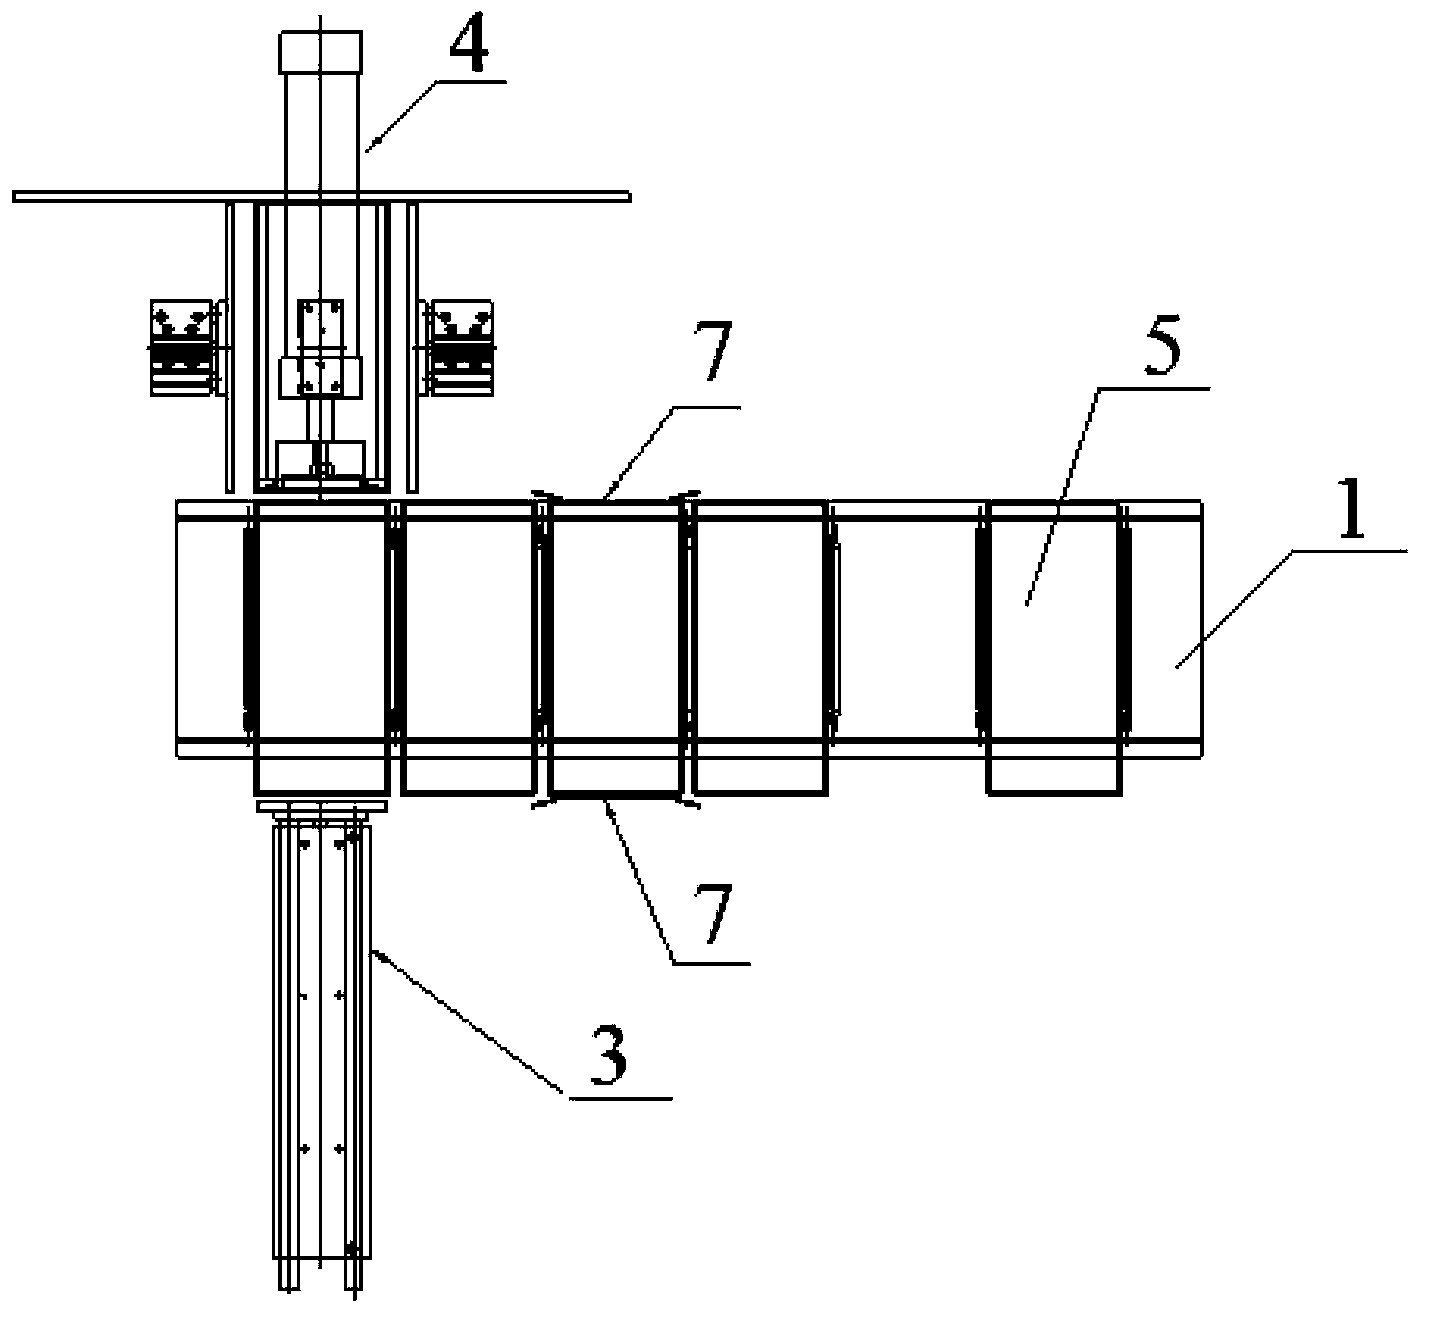 Automatic adhered-carton flattening device and application of same